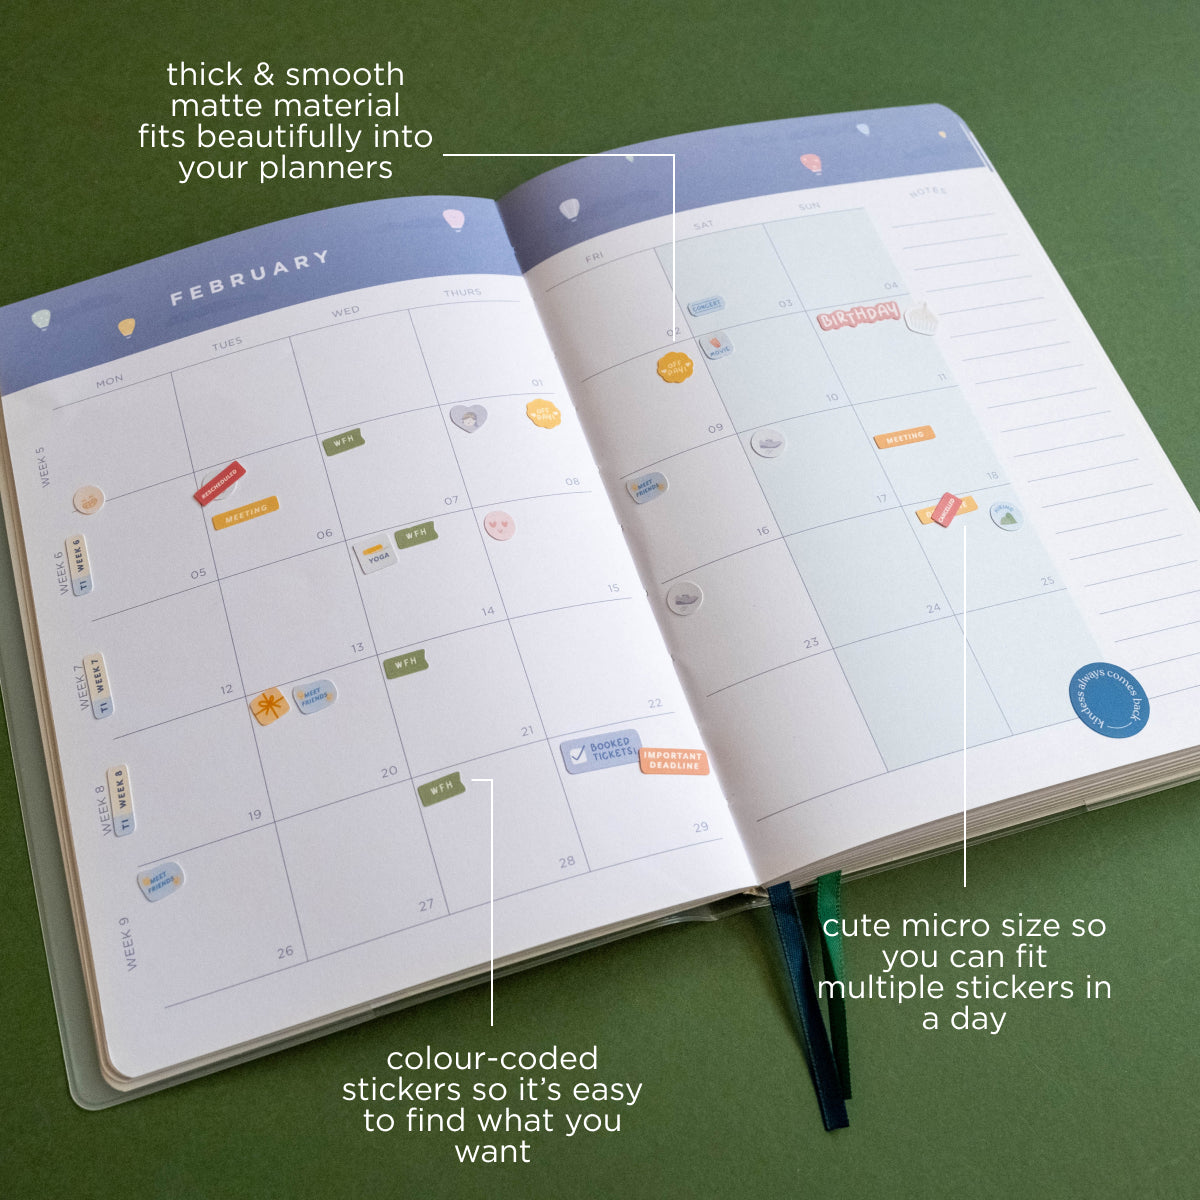 WFH (Work from Home) - Colour-coded Planner Sticker Sheet